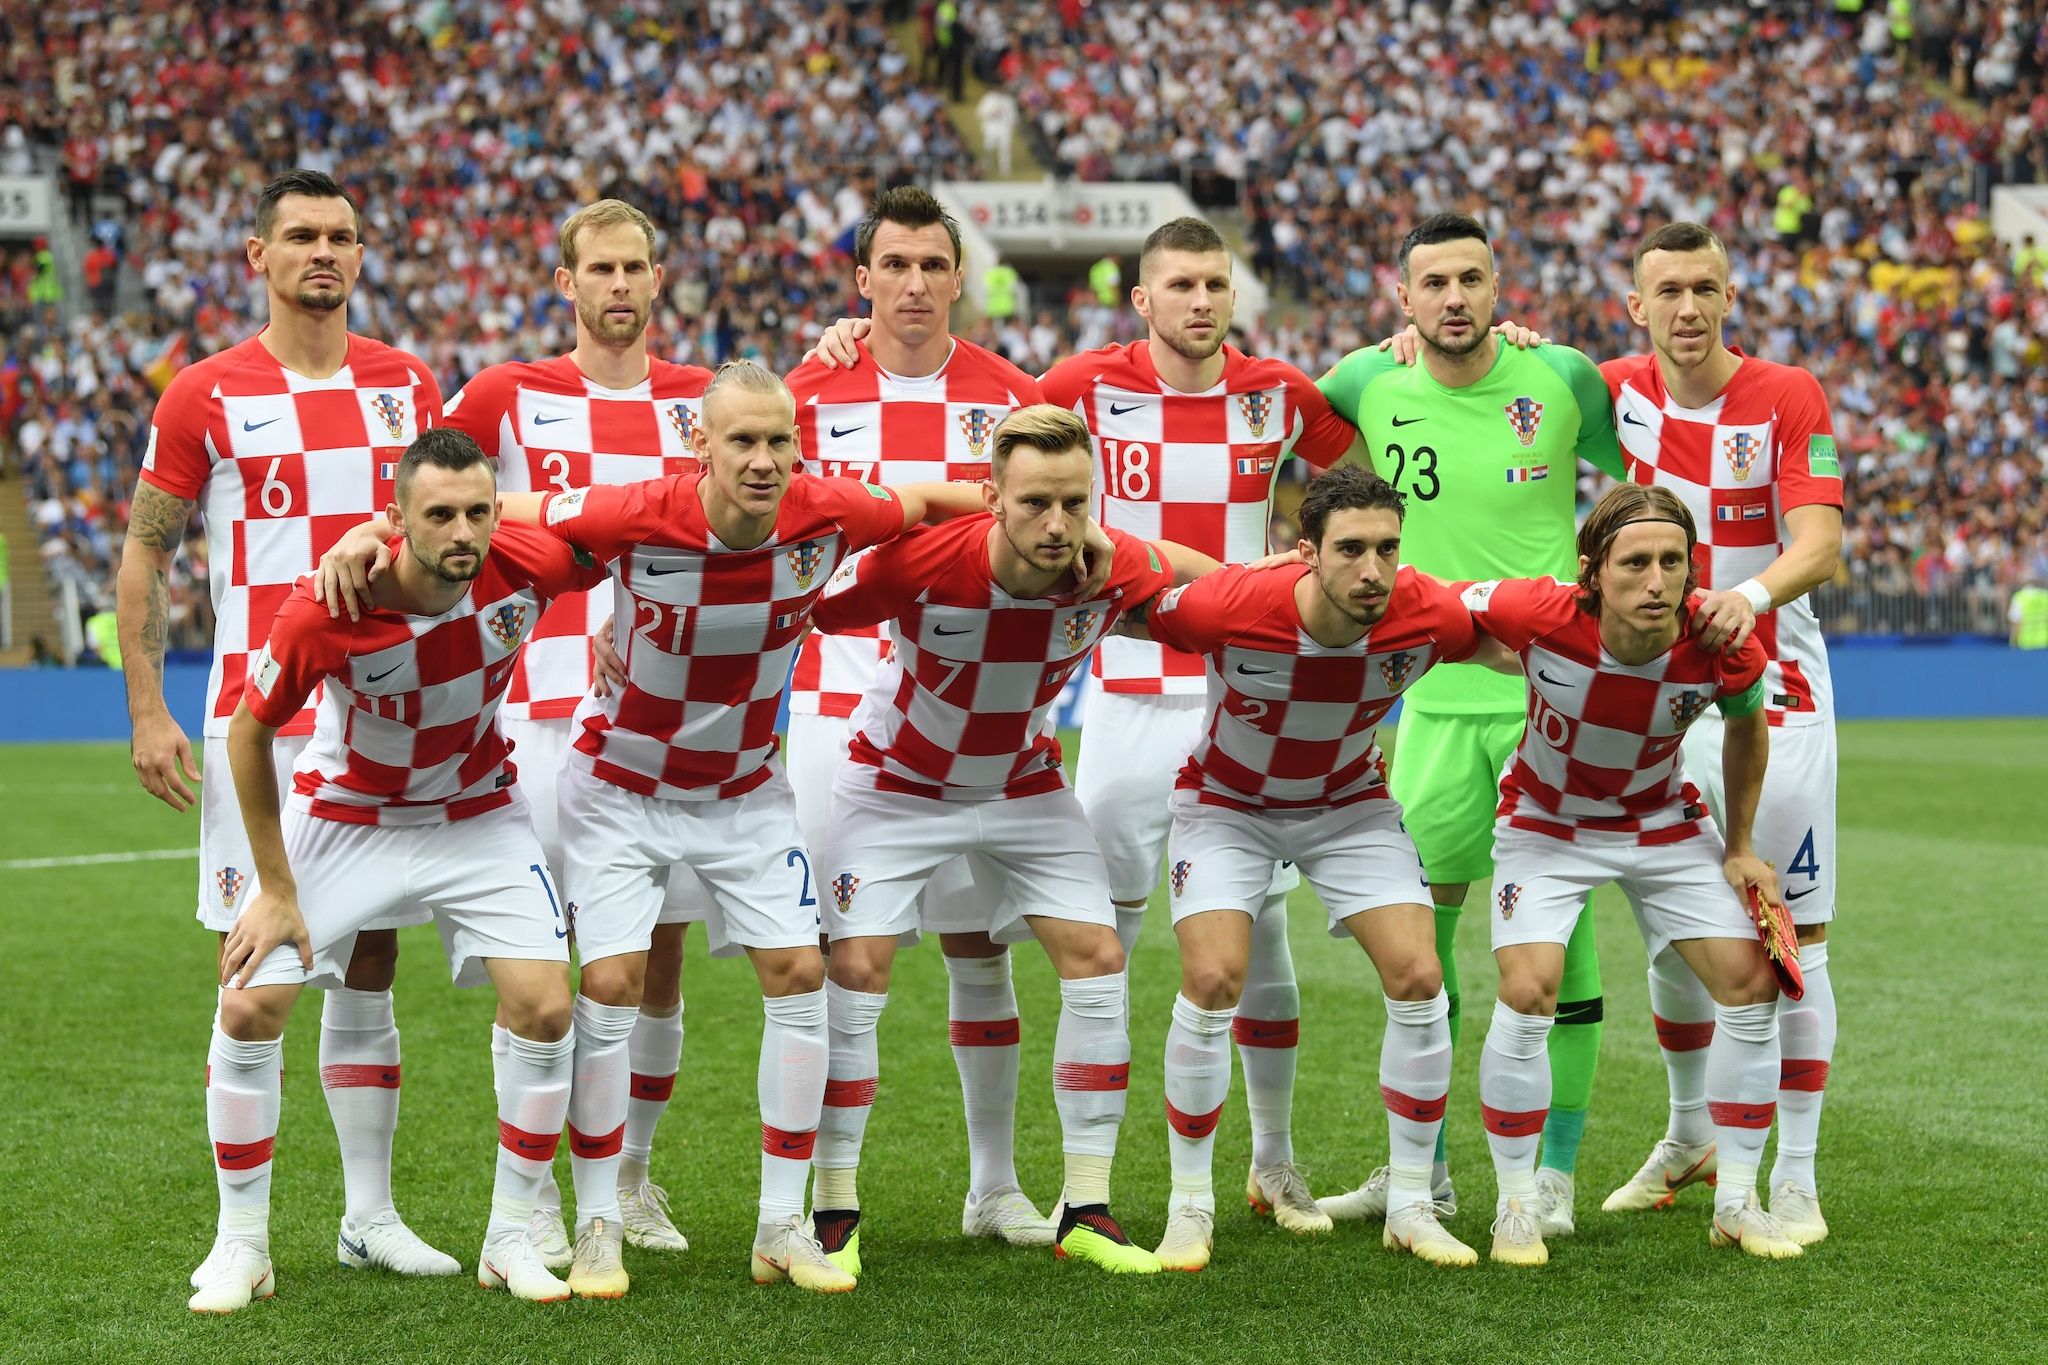 Croatia At the Qatar World Cup 2022: Group, Schedule of Matches, Star Players, Roster, And Coach